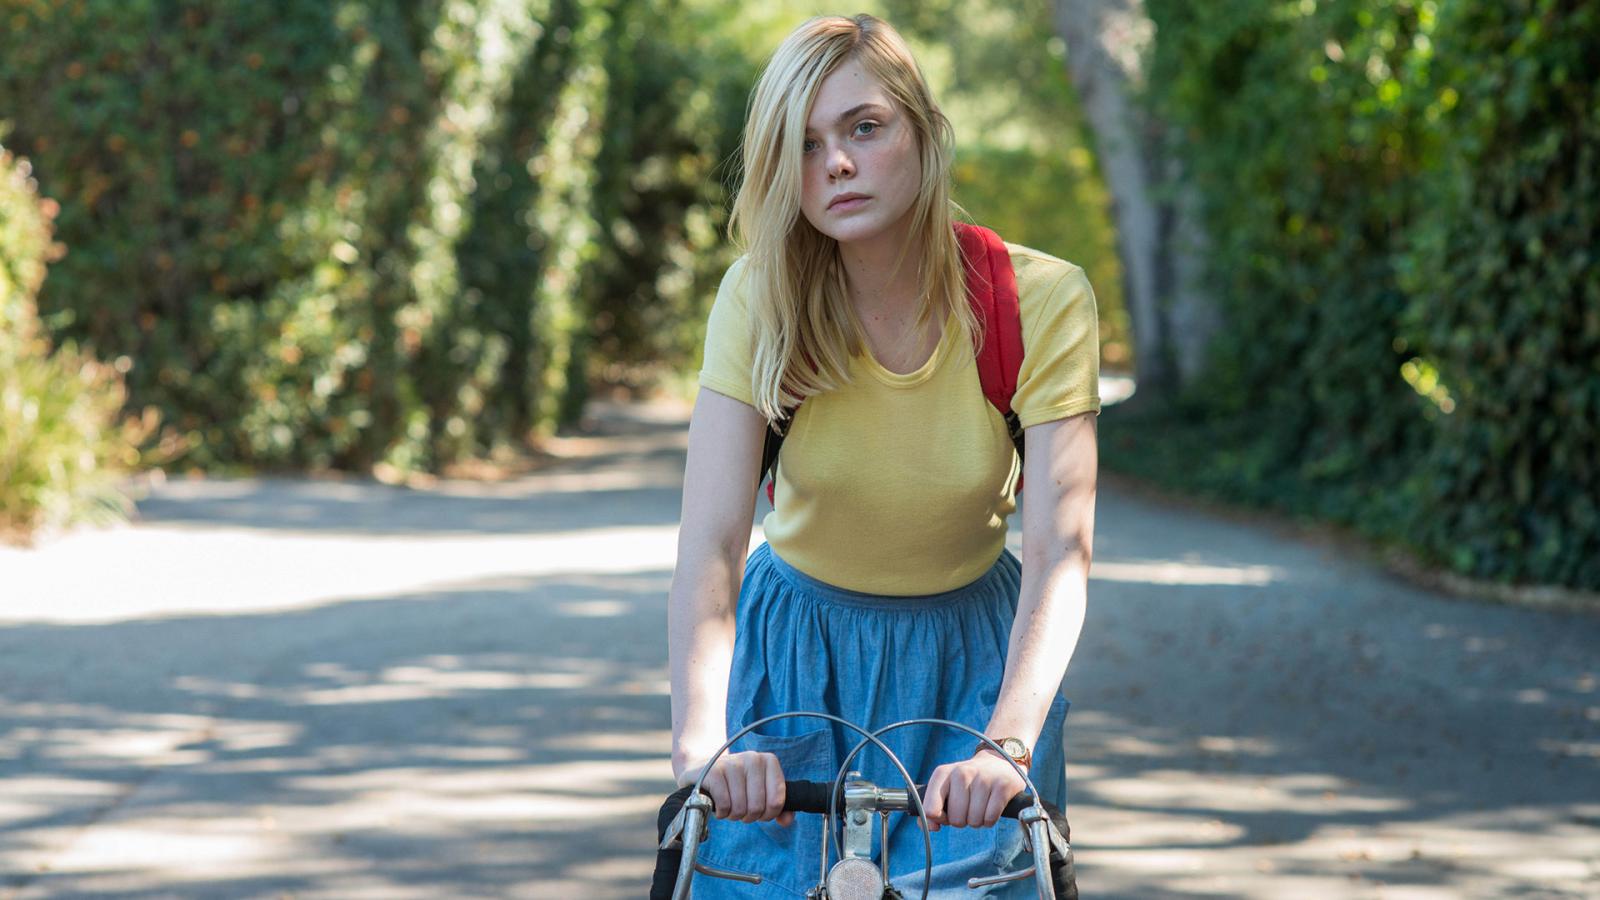 The 10 Best Elle Fanning Movies, According to Rotten Tomatoes - image 1